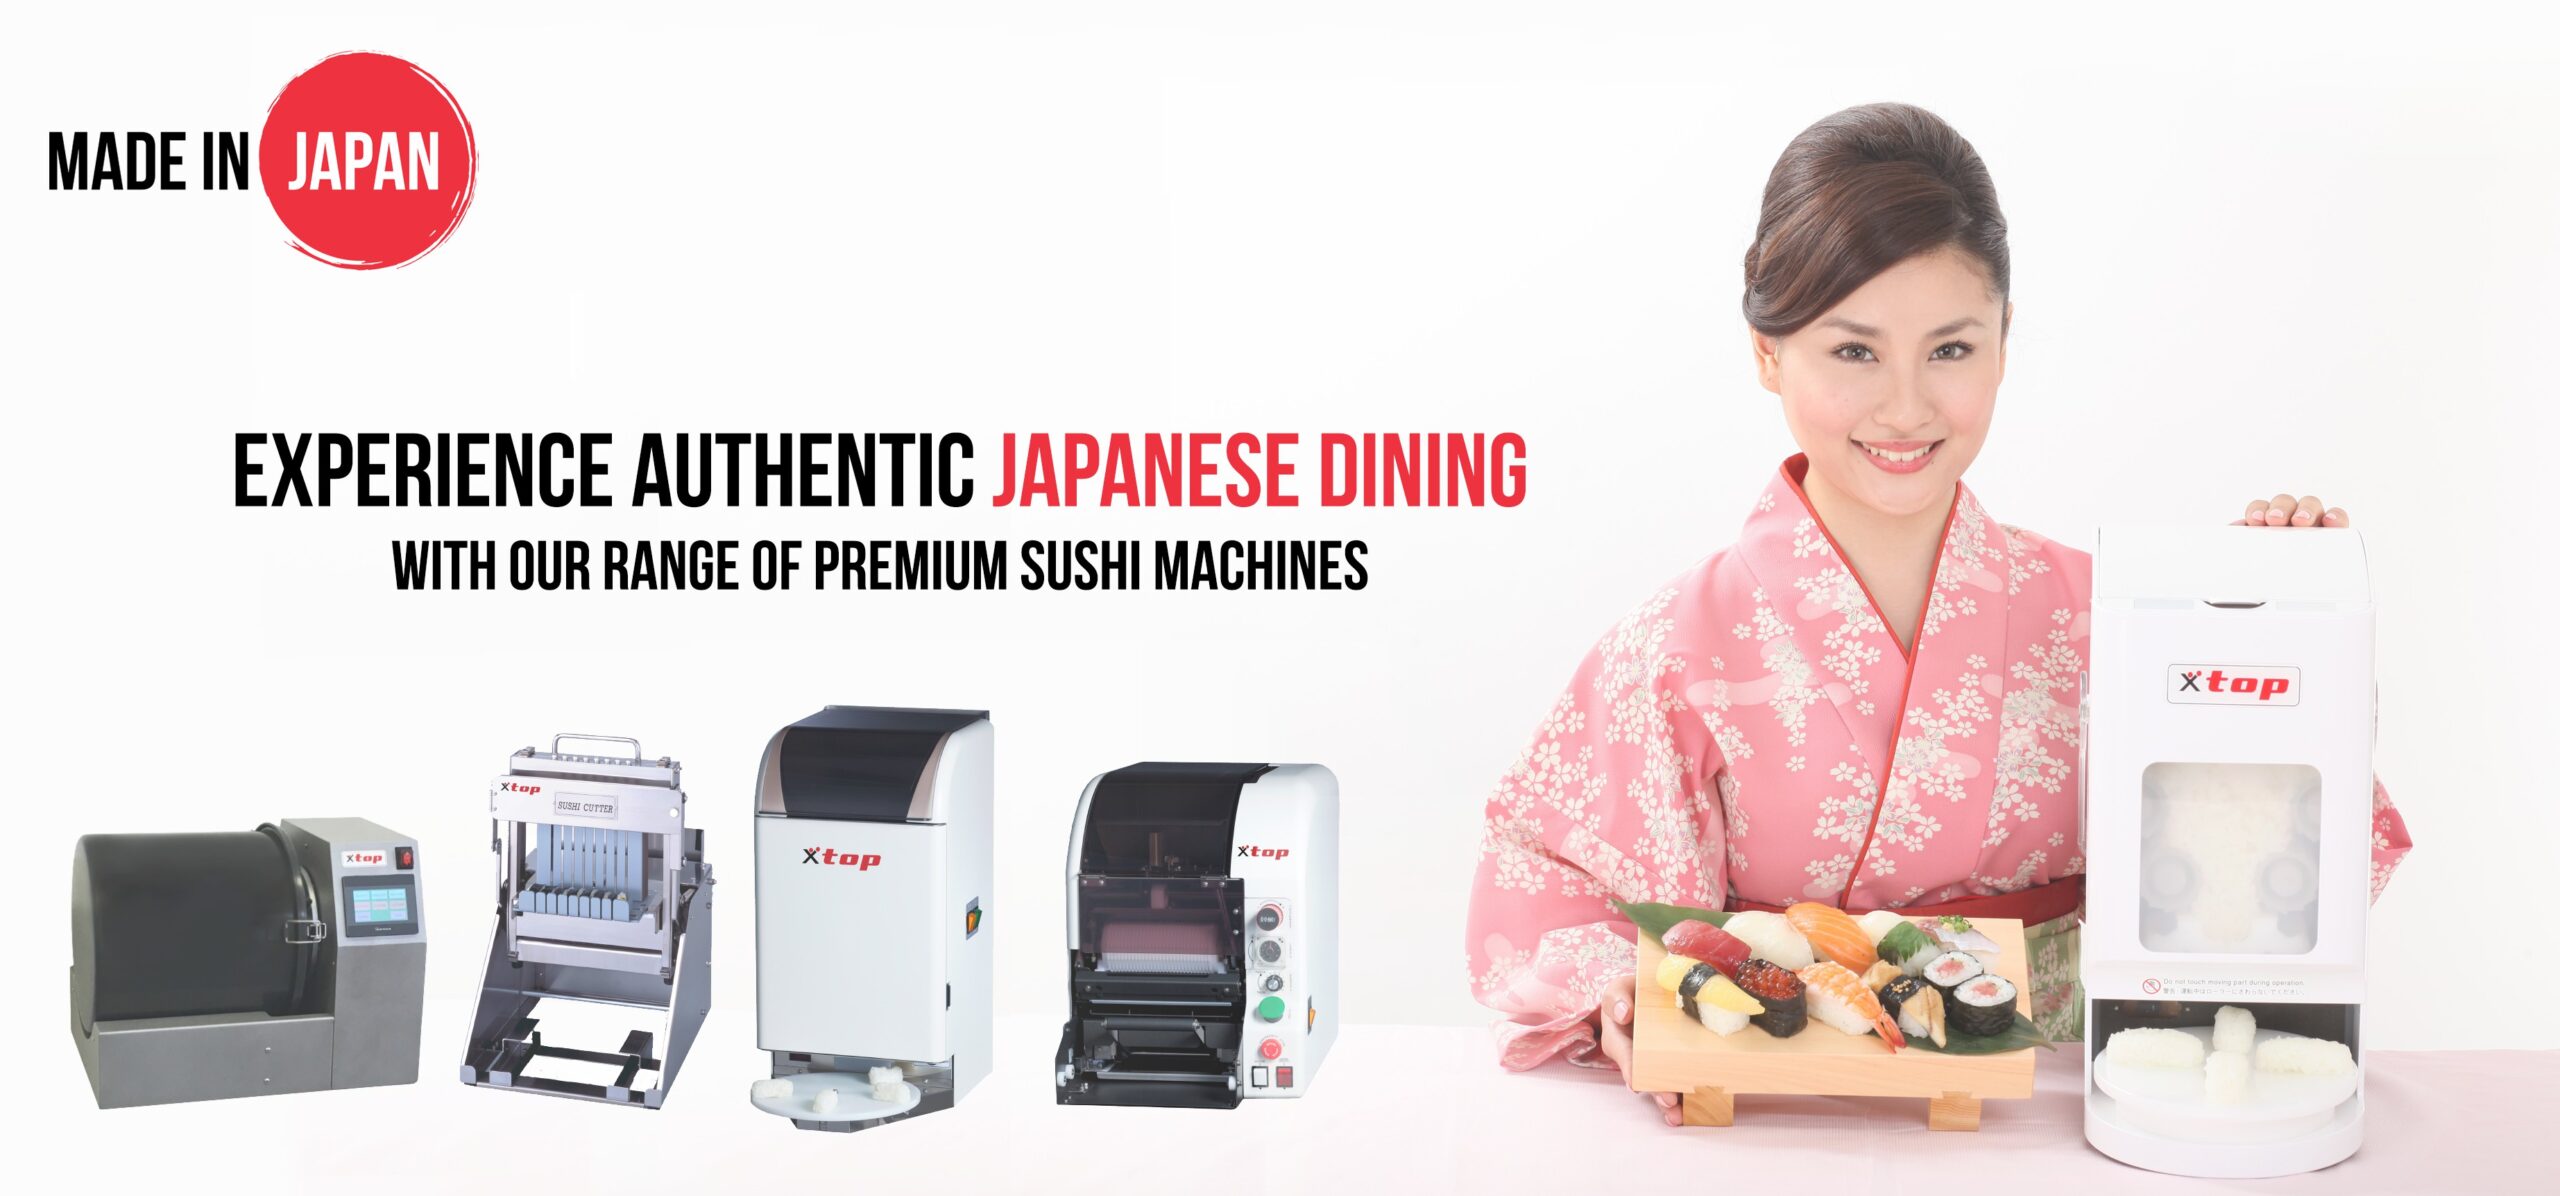 https://topsushimaker.com/wp-content/uploads/2021/03/Top-Sushi-Authenticity-Banner-scaled.jpg